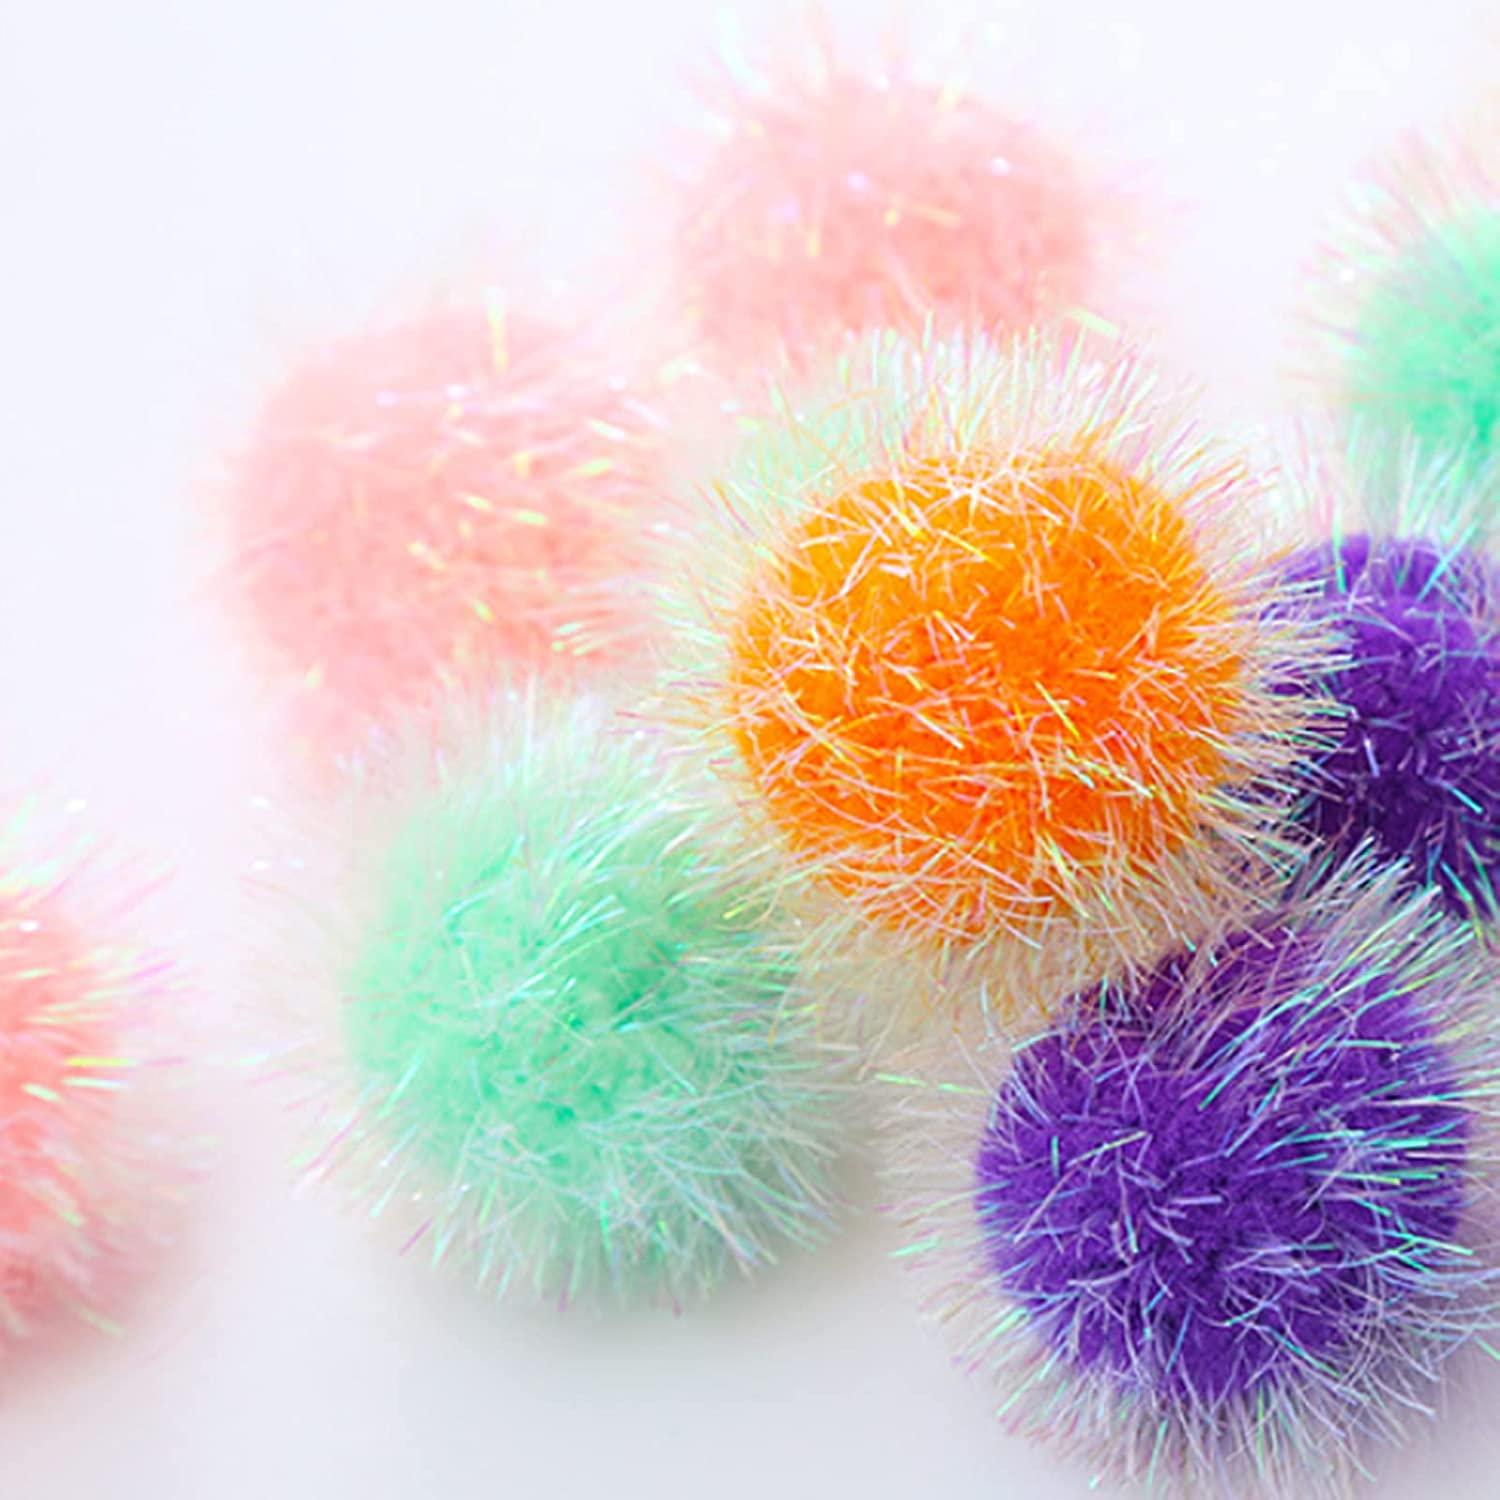 Colorful Pom Poms Balls Toy With Bell For Indoor Cats, Lightweight